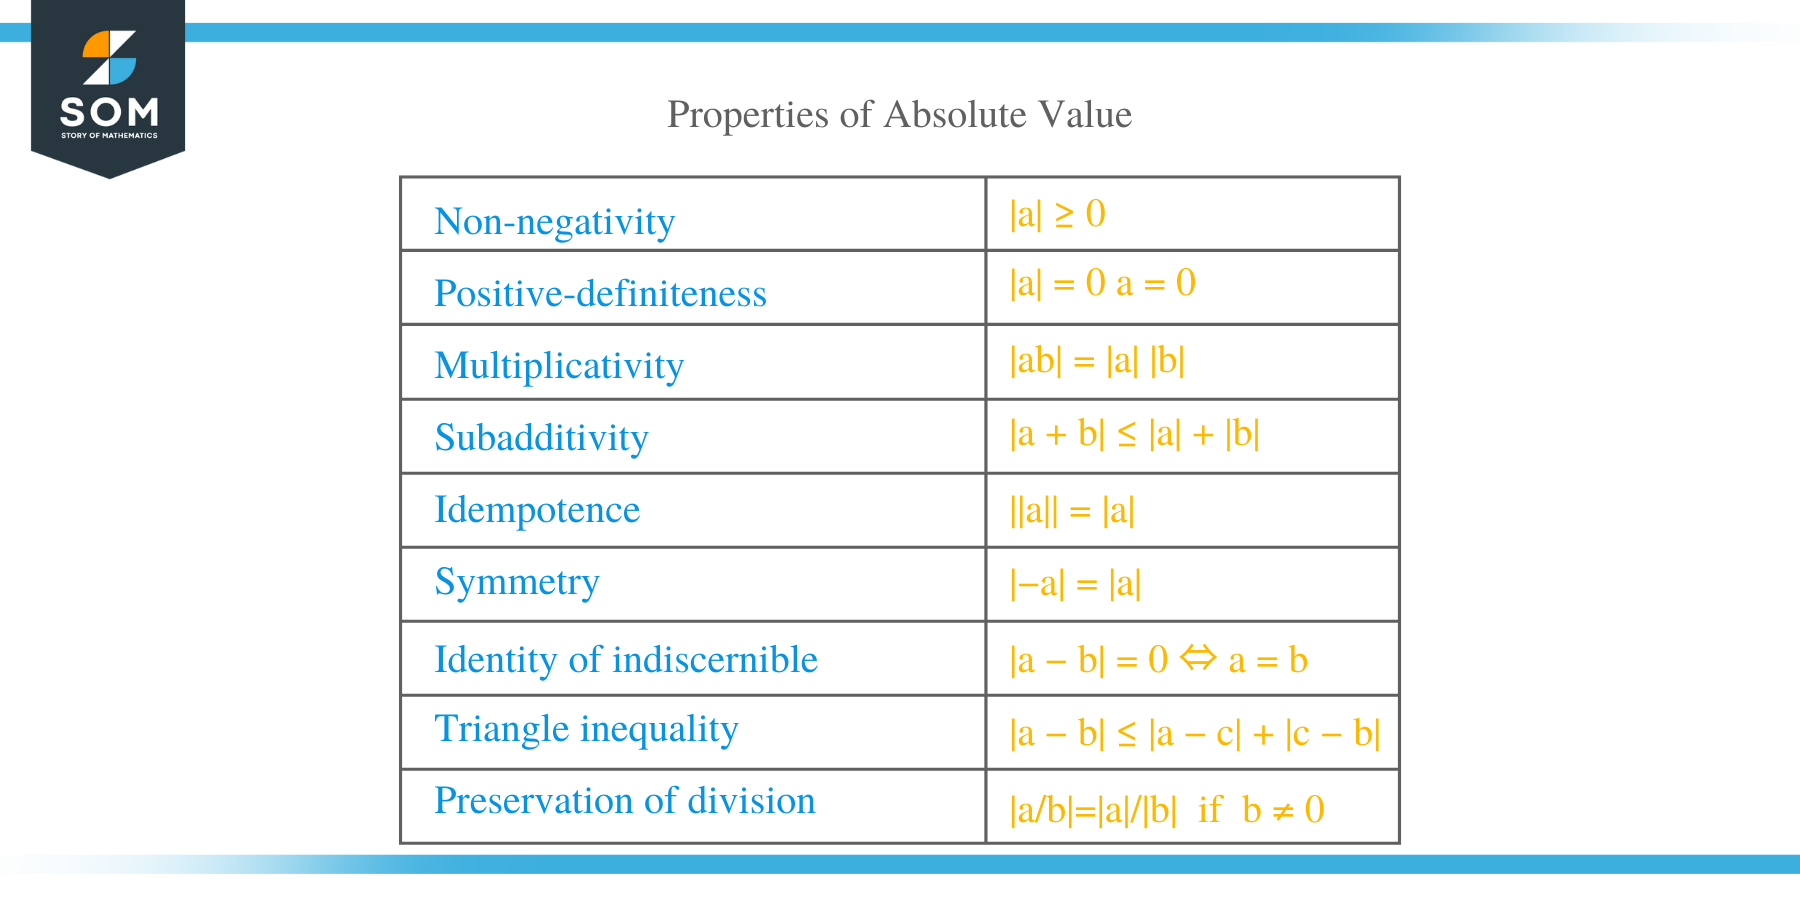 Properties of Absolute Value